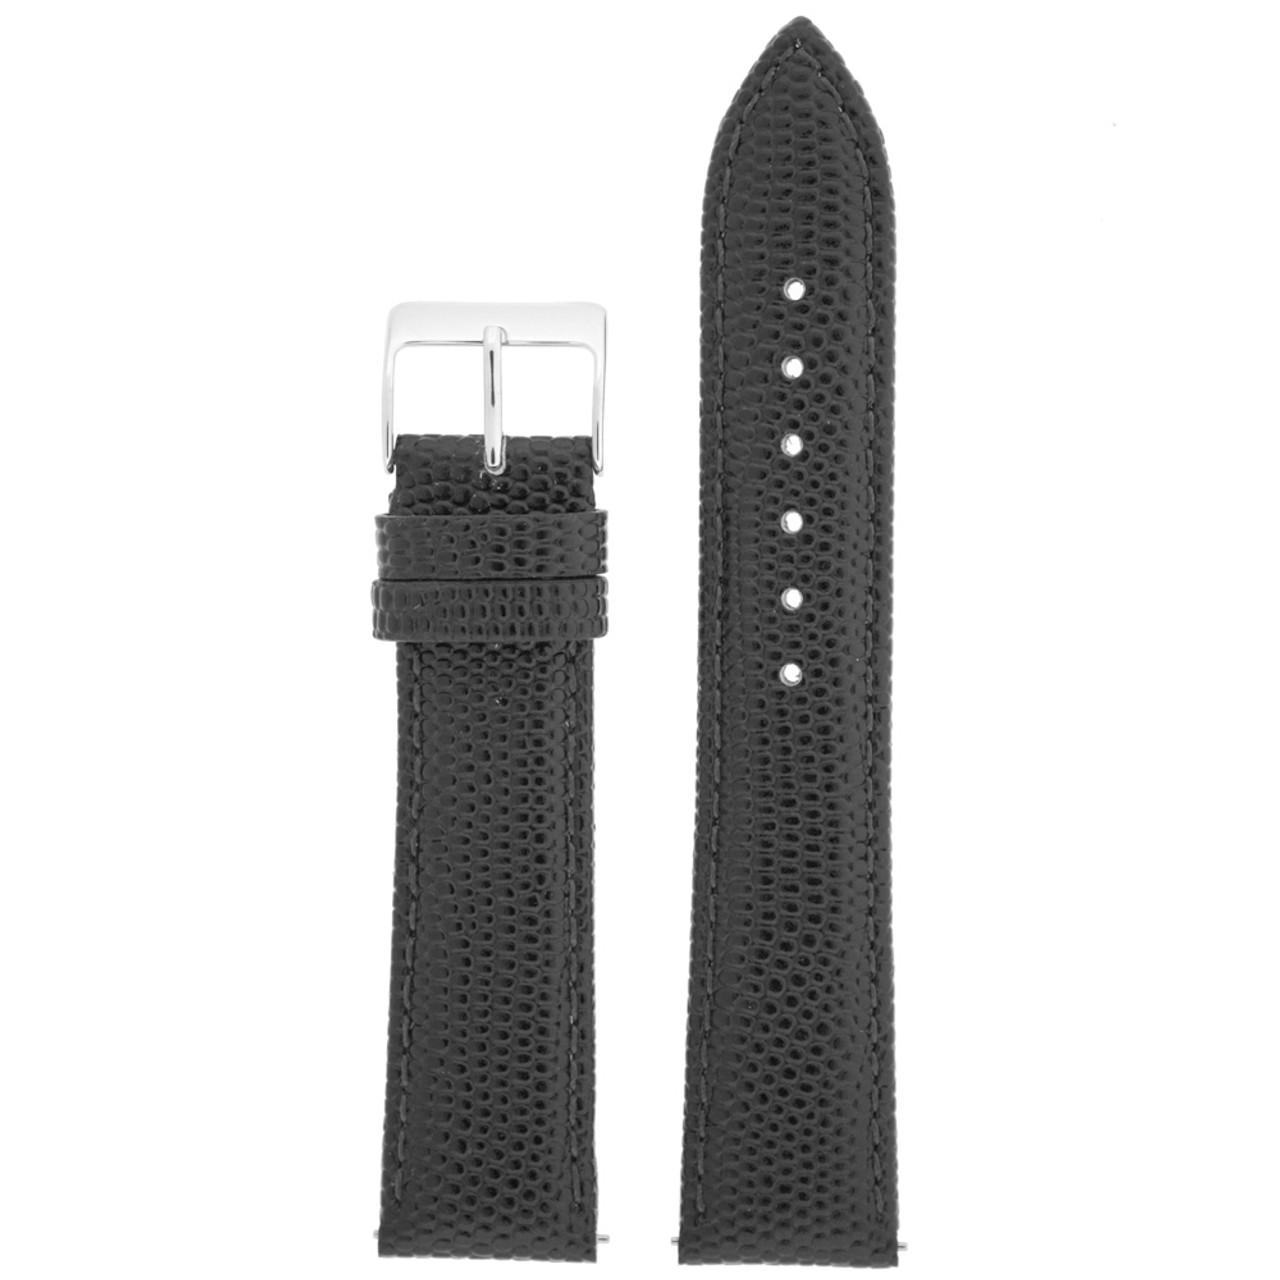 Watch Band Genuine Leather Lizard Grain Black Quick Release Built-in Pins